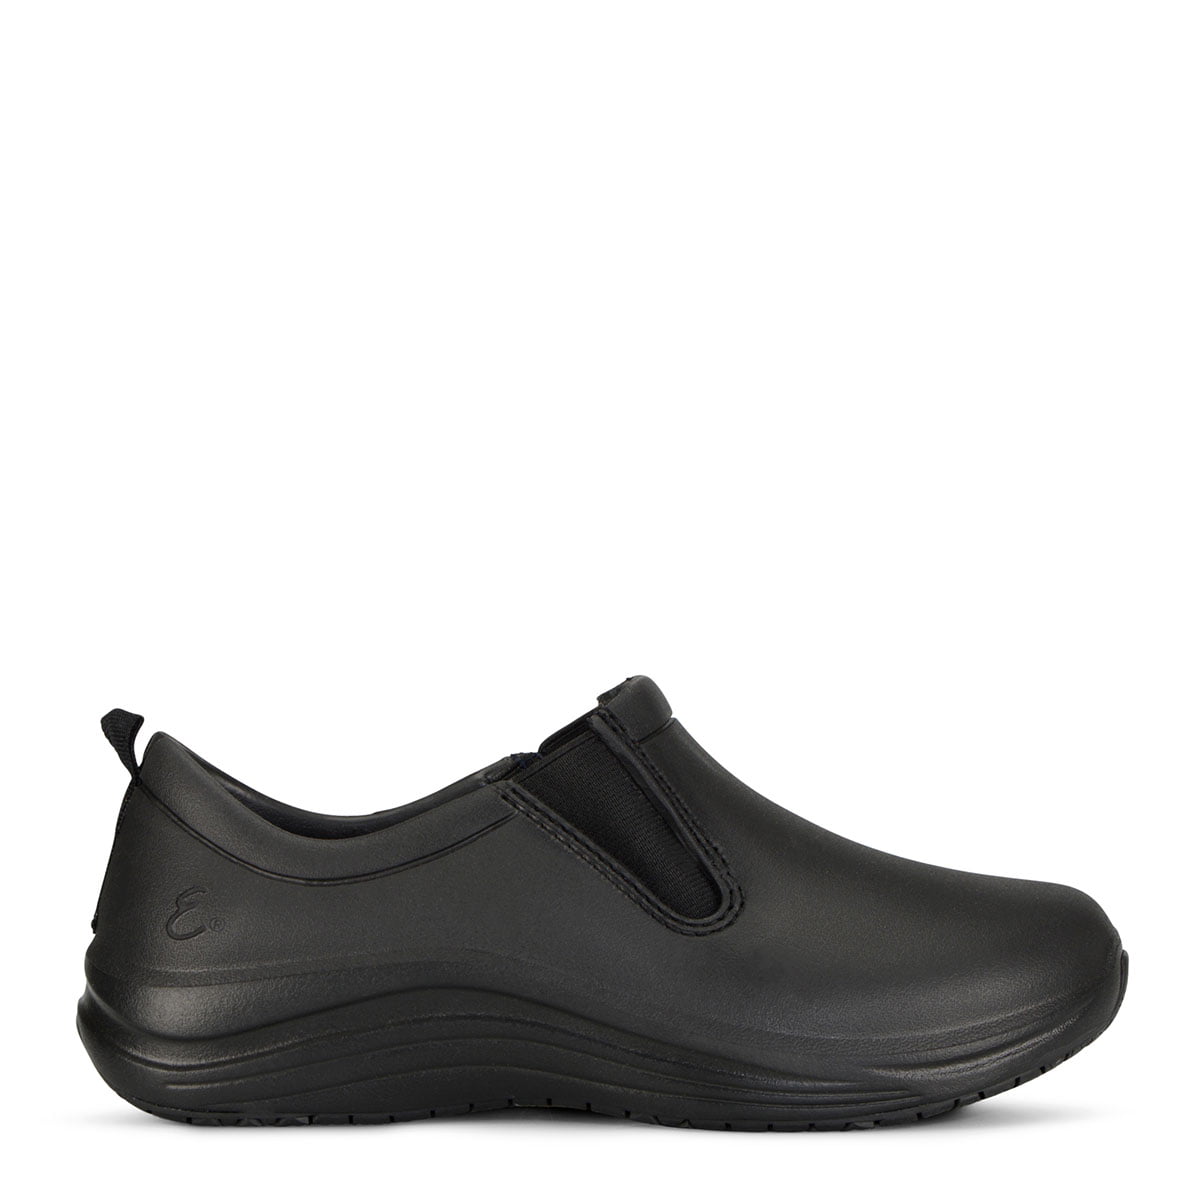 Slip Resistant and Durable Clogs. ANGIE UNIFORMS Women's Work Shoes for Healthcare Kitchen and Hospitality 